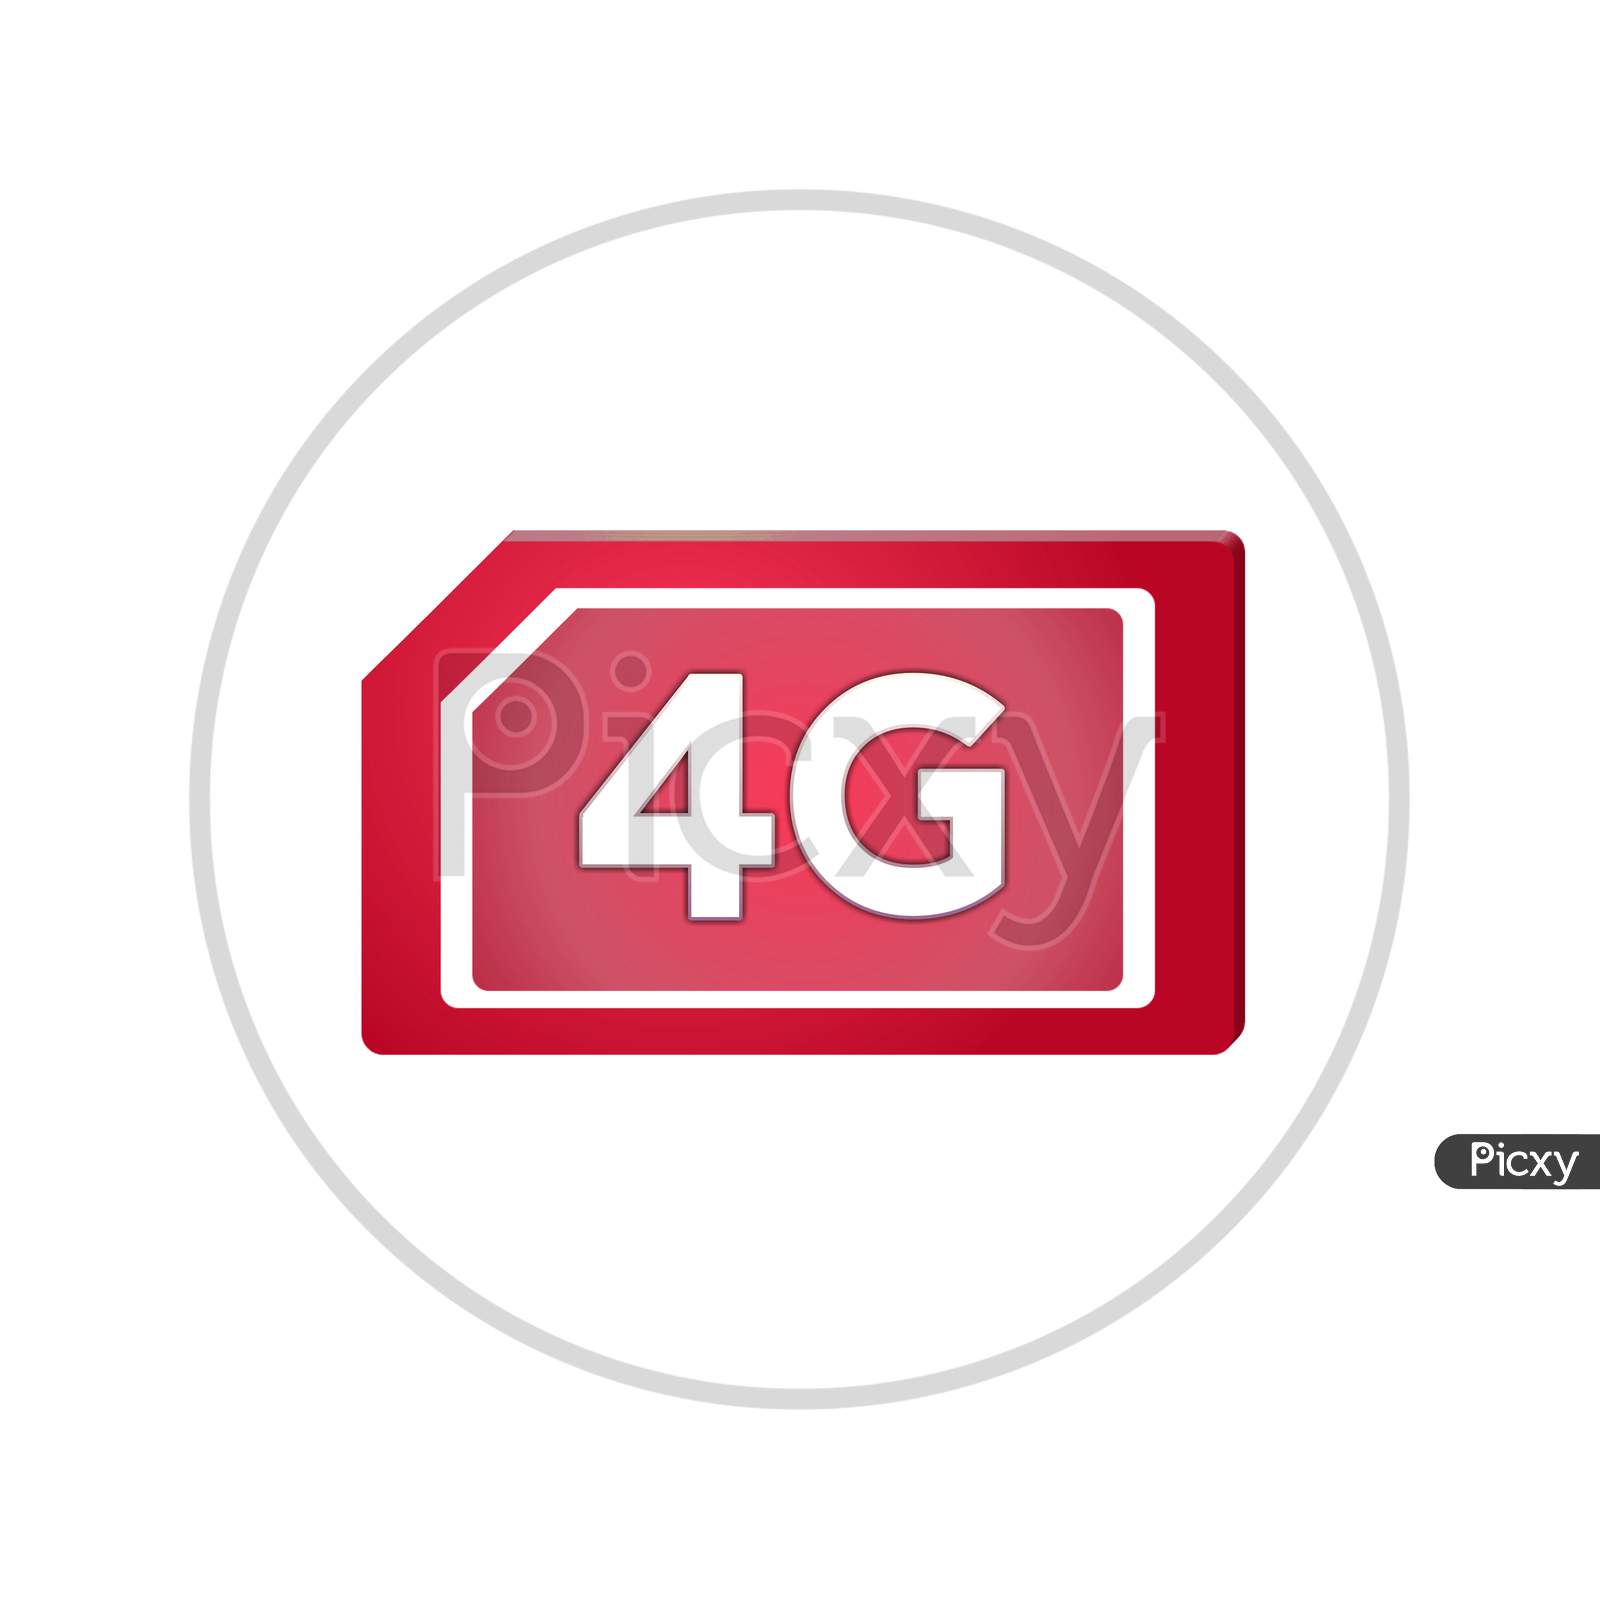 Illustration Of A Red Color 4G Sim Card, Isolated On A White Background